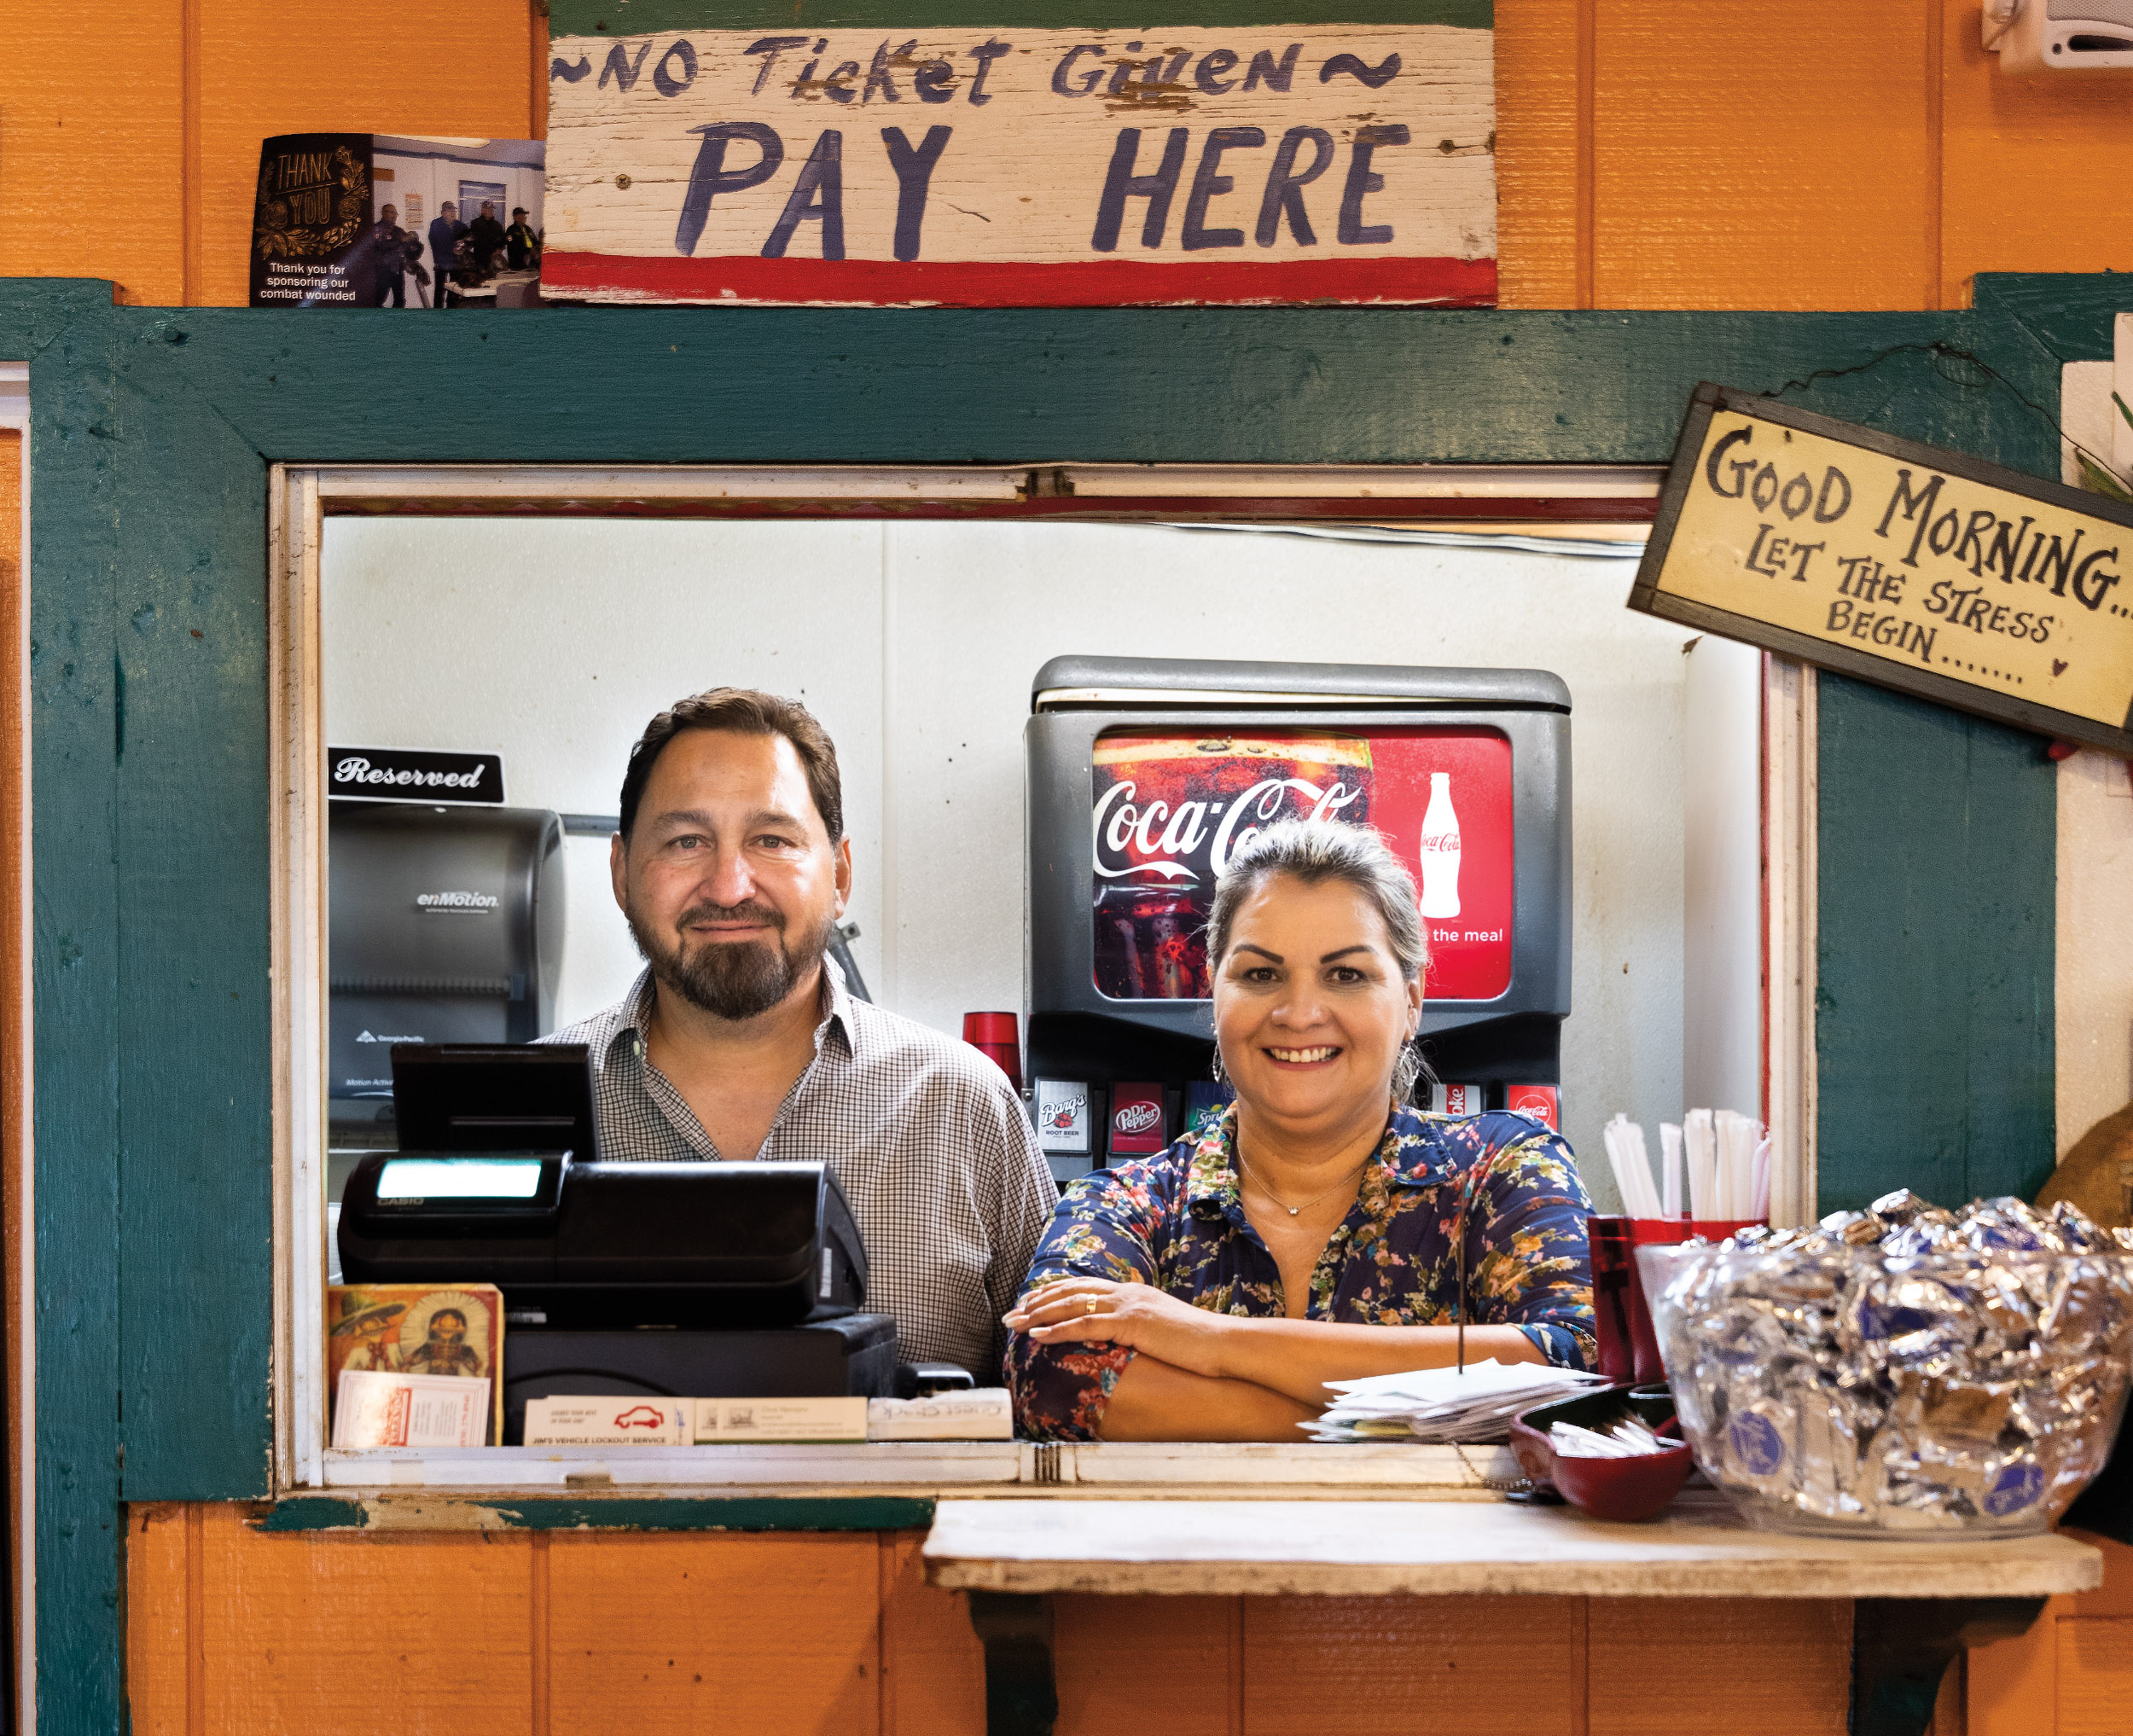 A man and woman stand behind a restaurant counter under a sign that says "No ticket given, pay here"